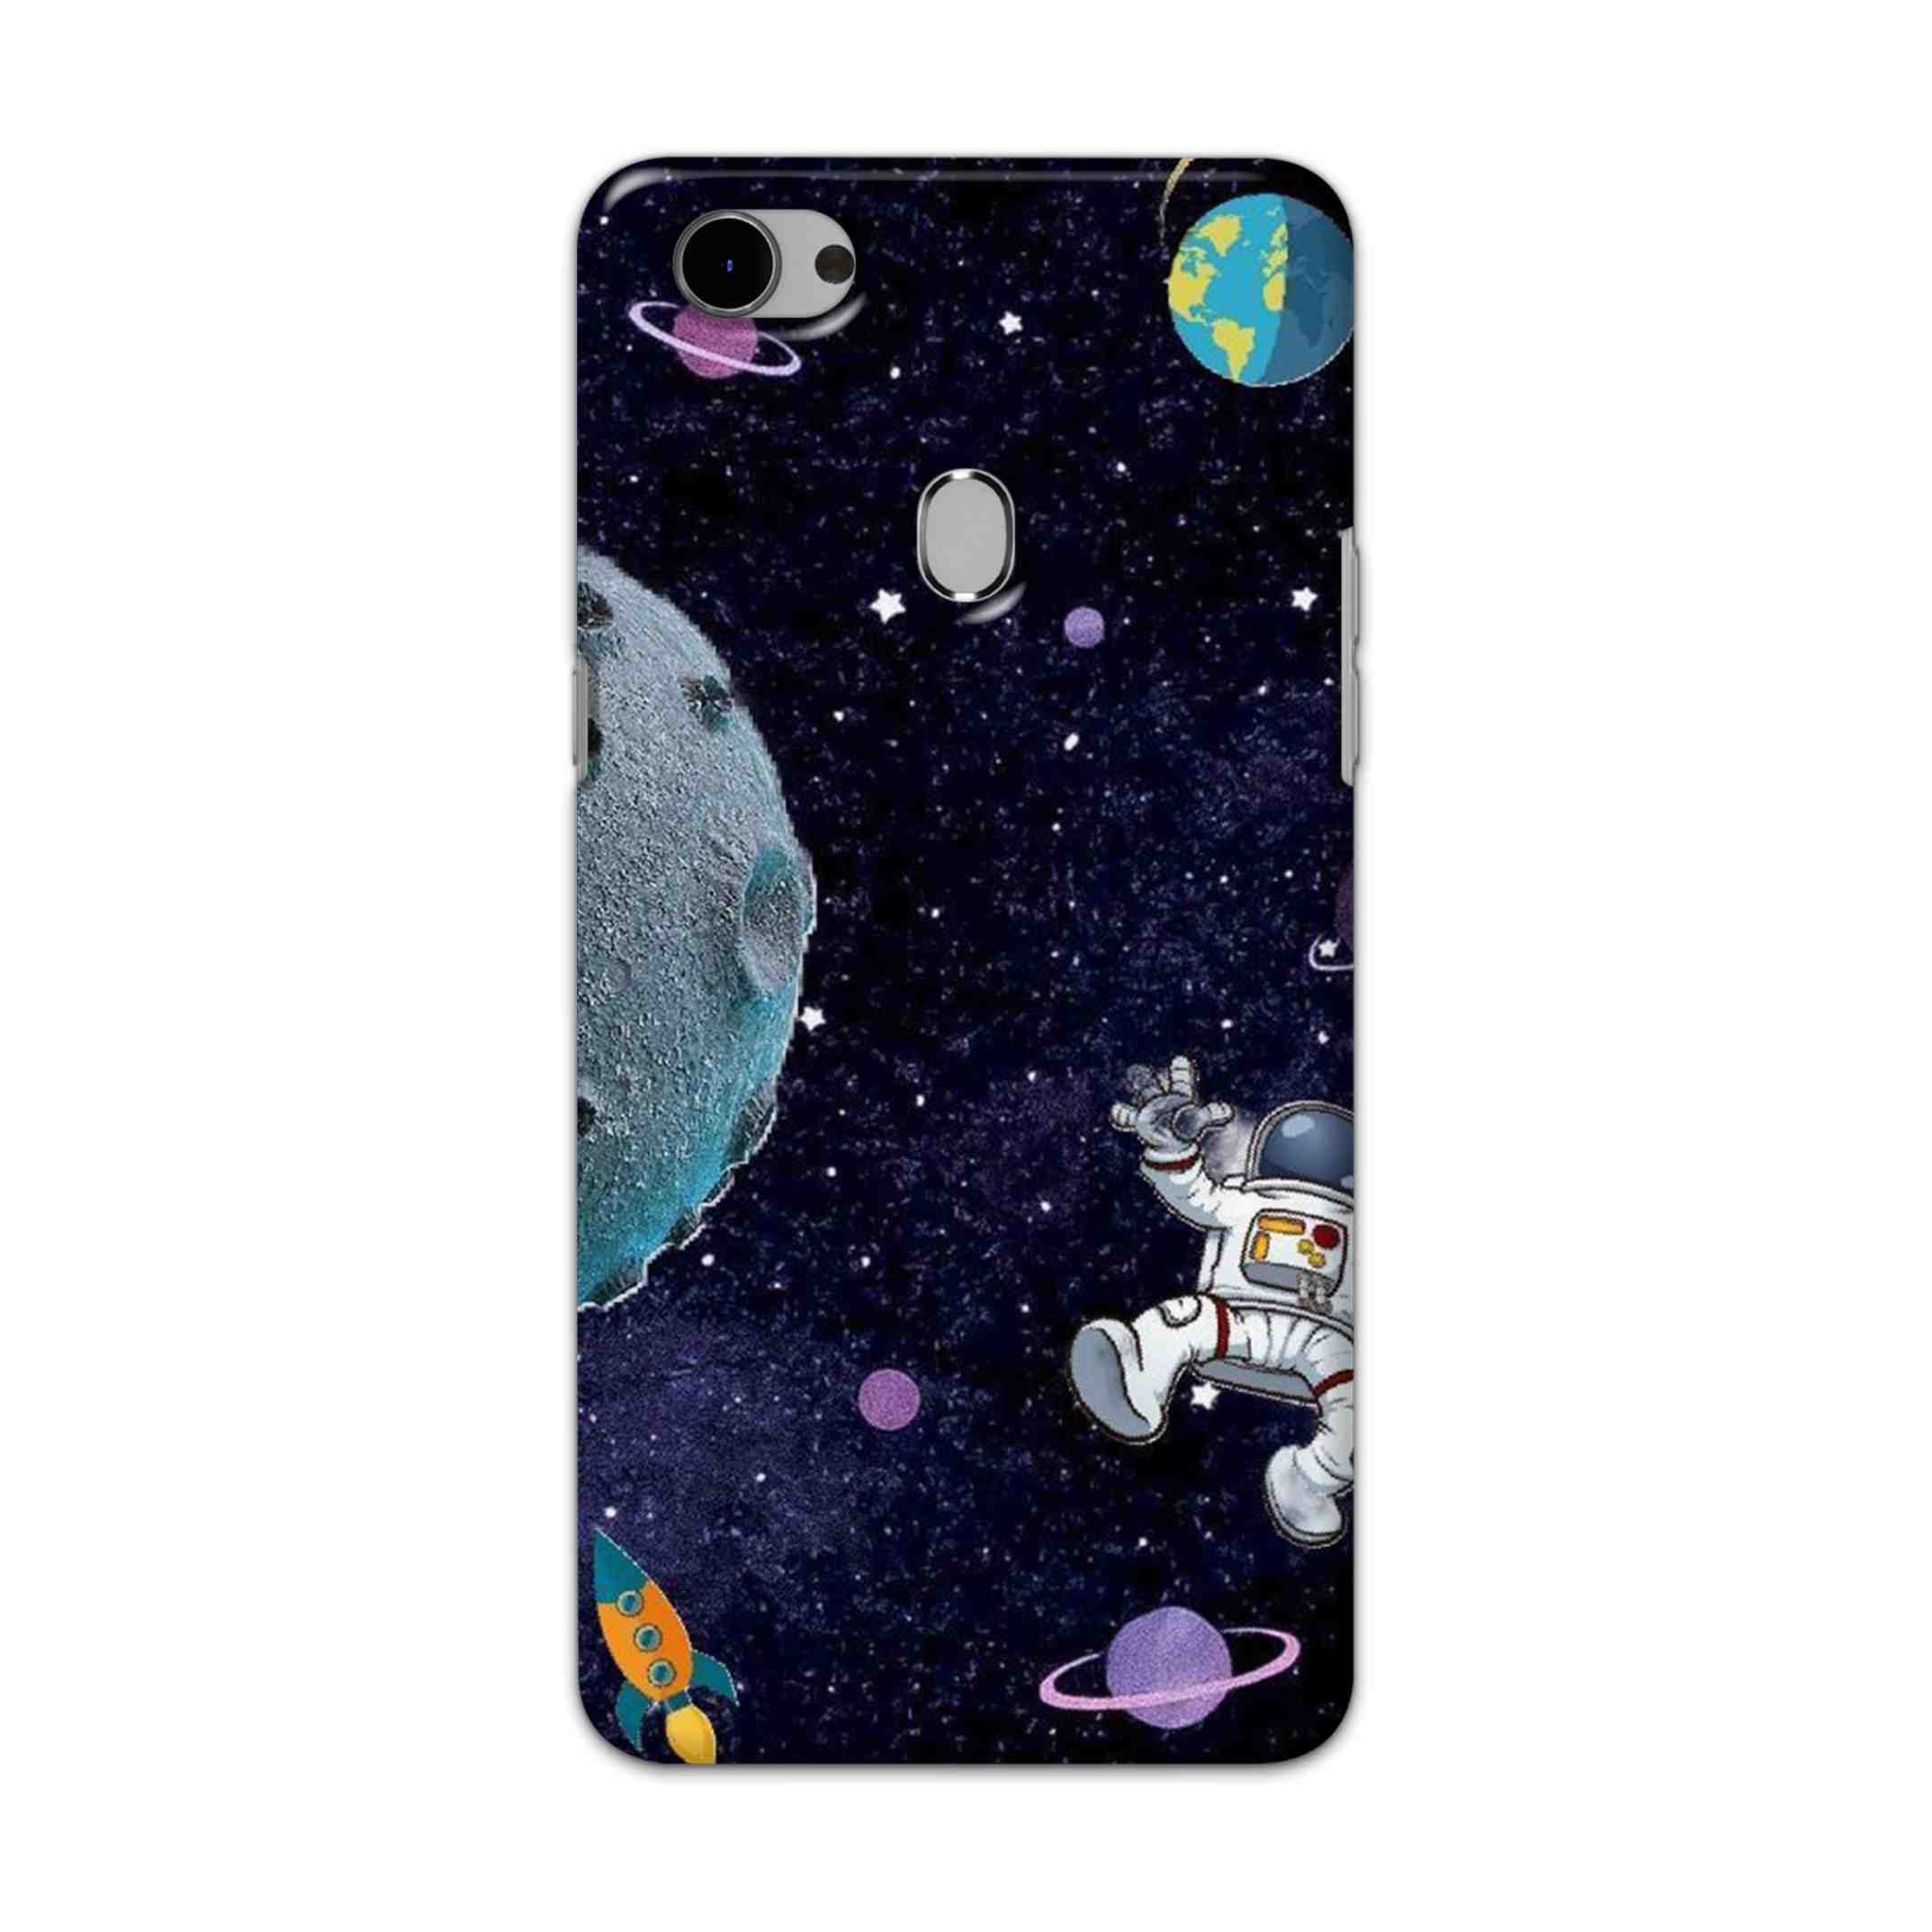 Buy Space Hard Back Mobile Phone Case Cover For Oppo F7 Online